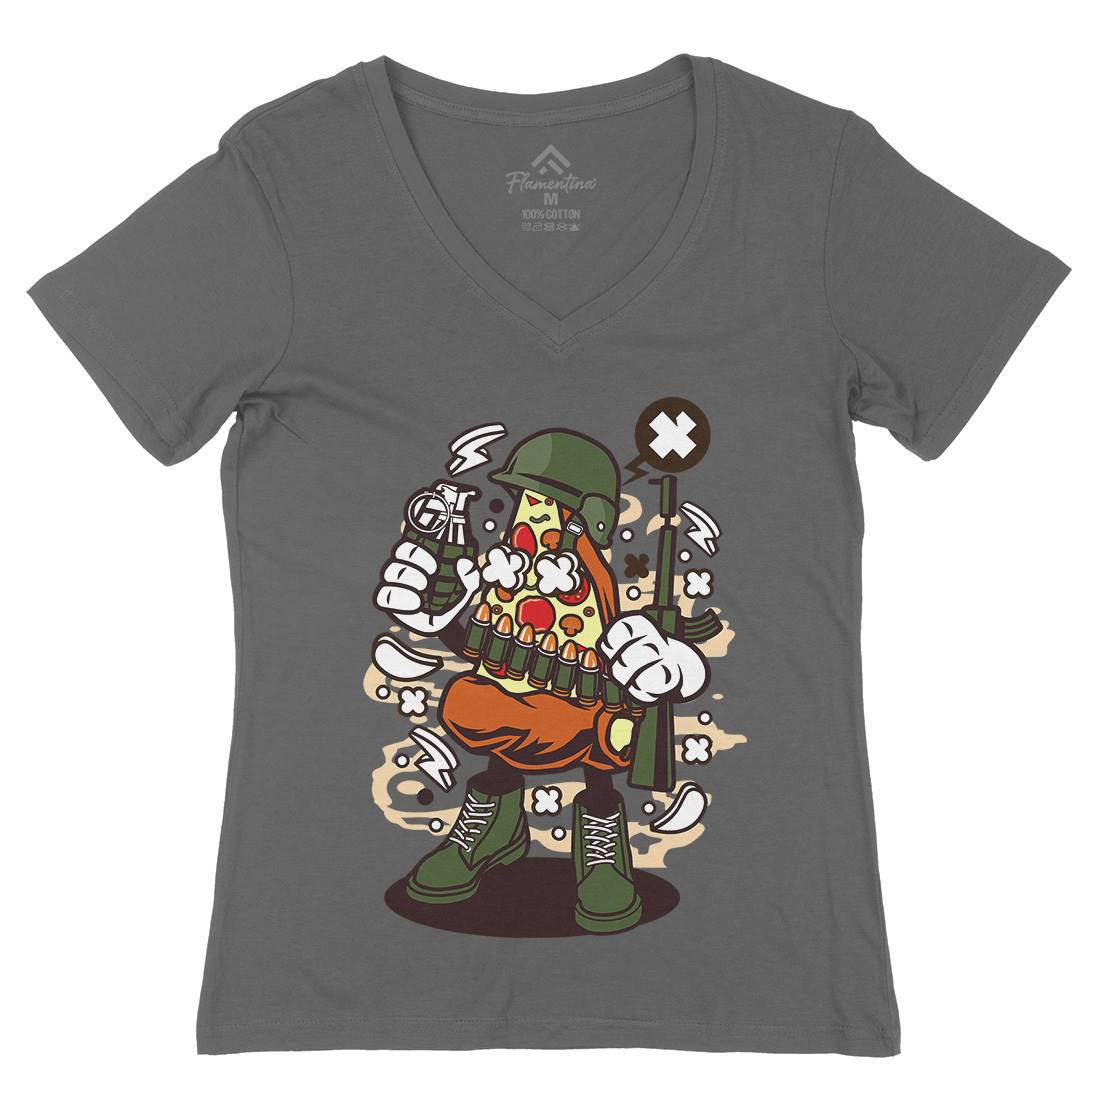 Soldier Pizza Womens Organic V-Neck T-Shirt Army C254